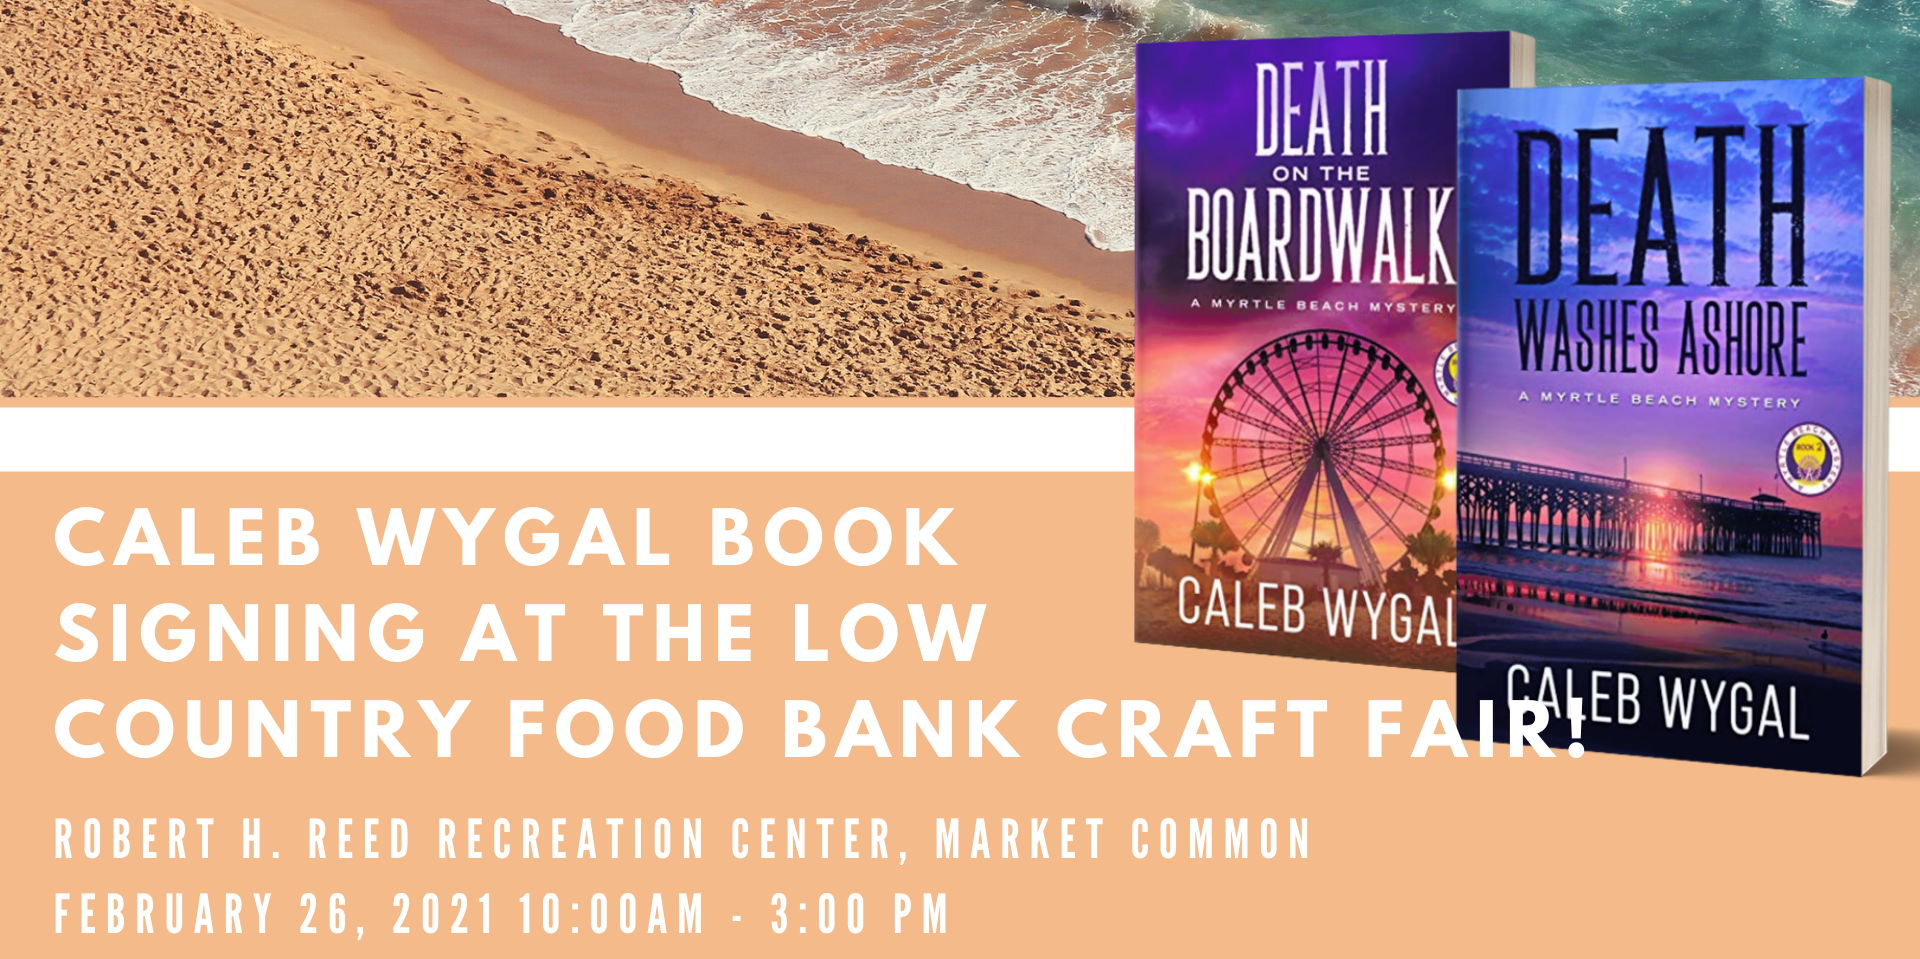 Caleb Wygal Book Signing at the 8th Annual Low Country Food Bank Craft Fair promotional image